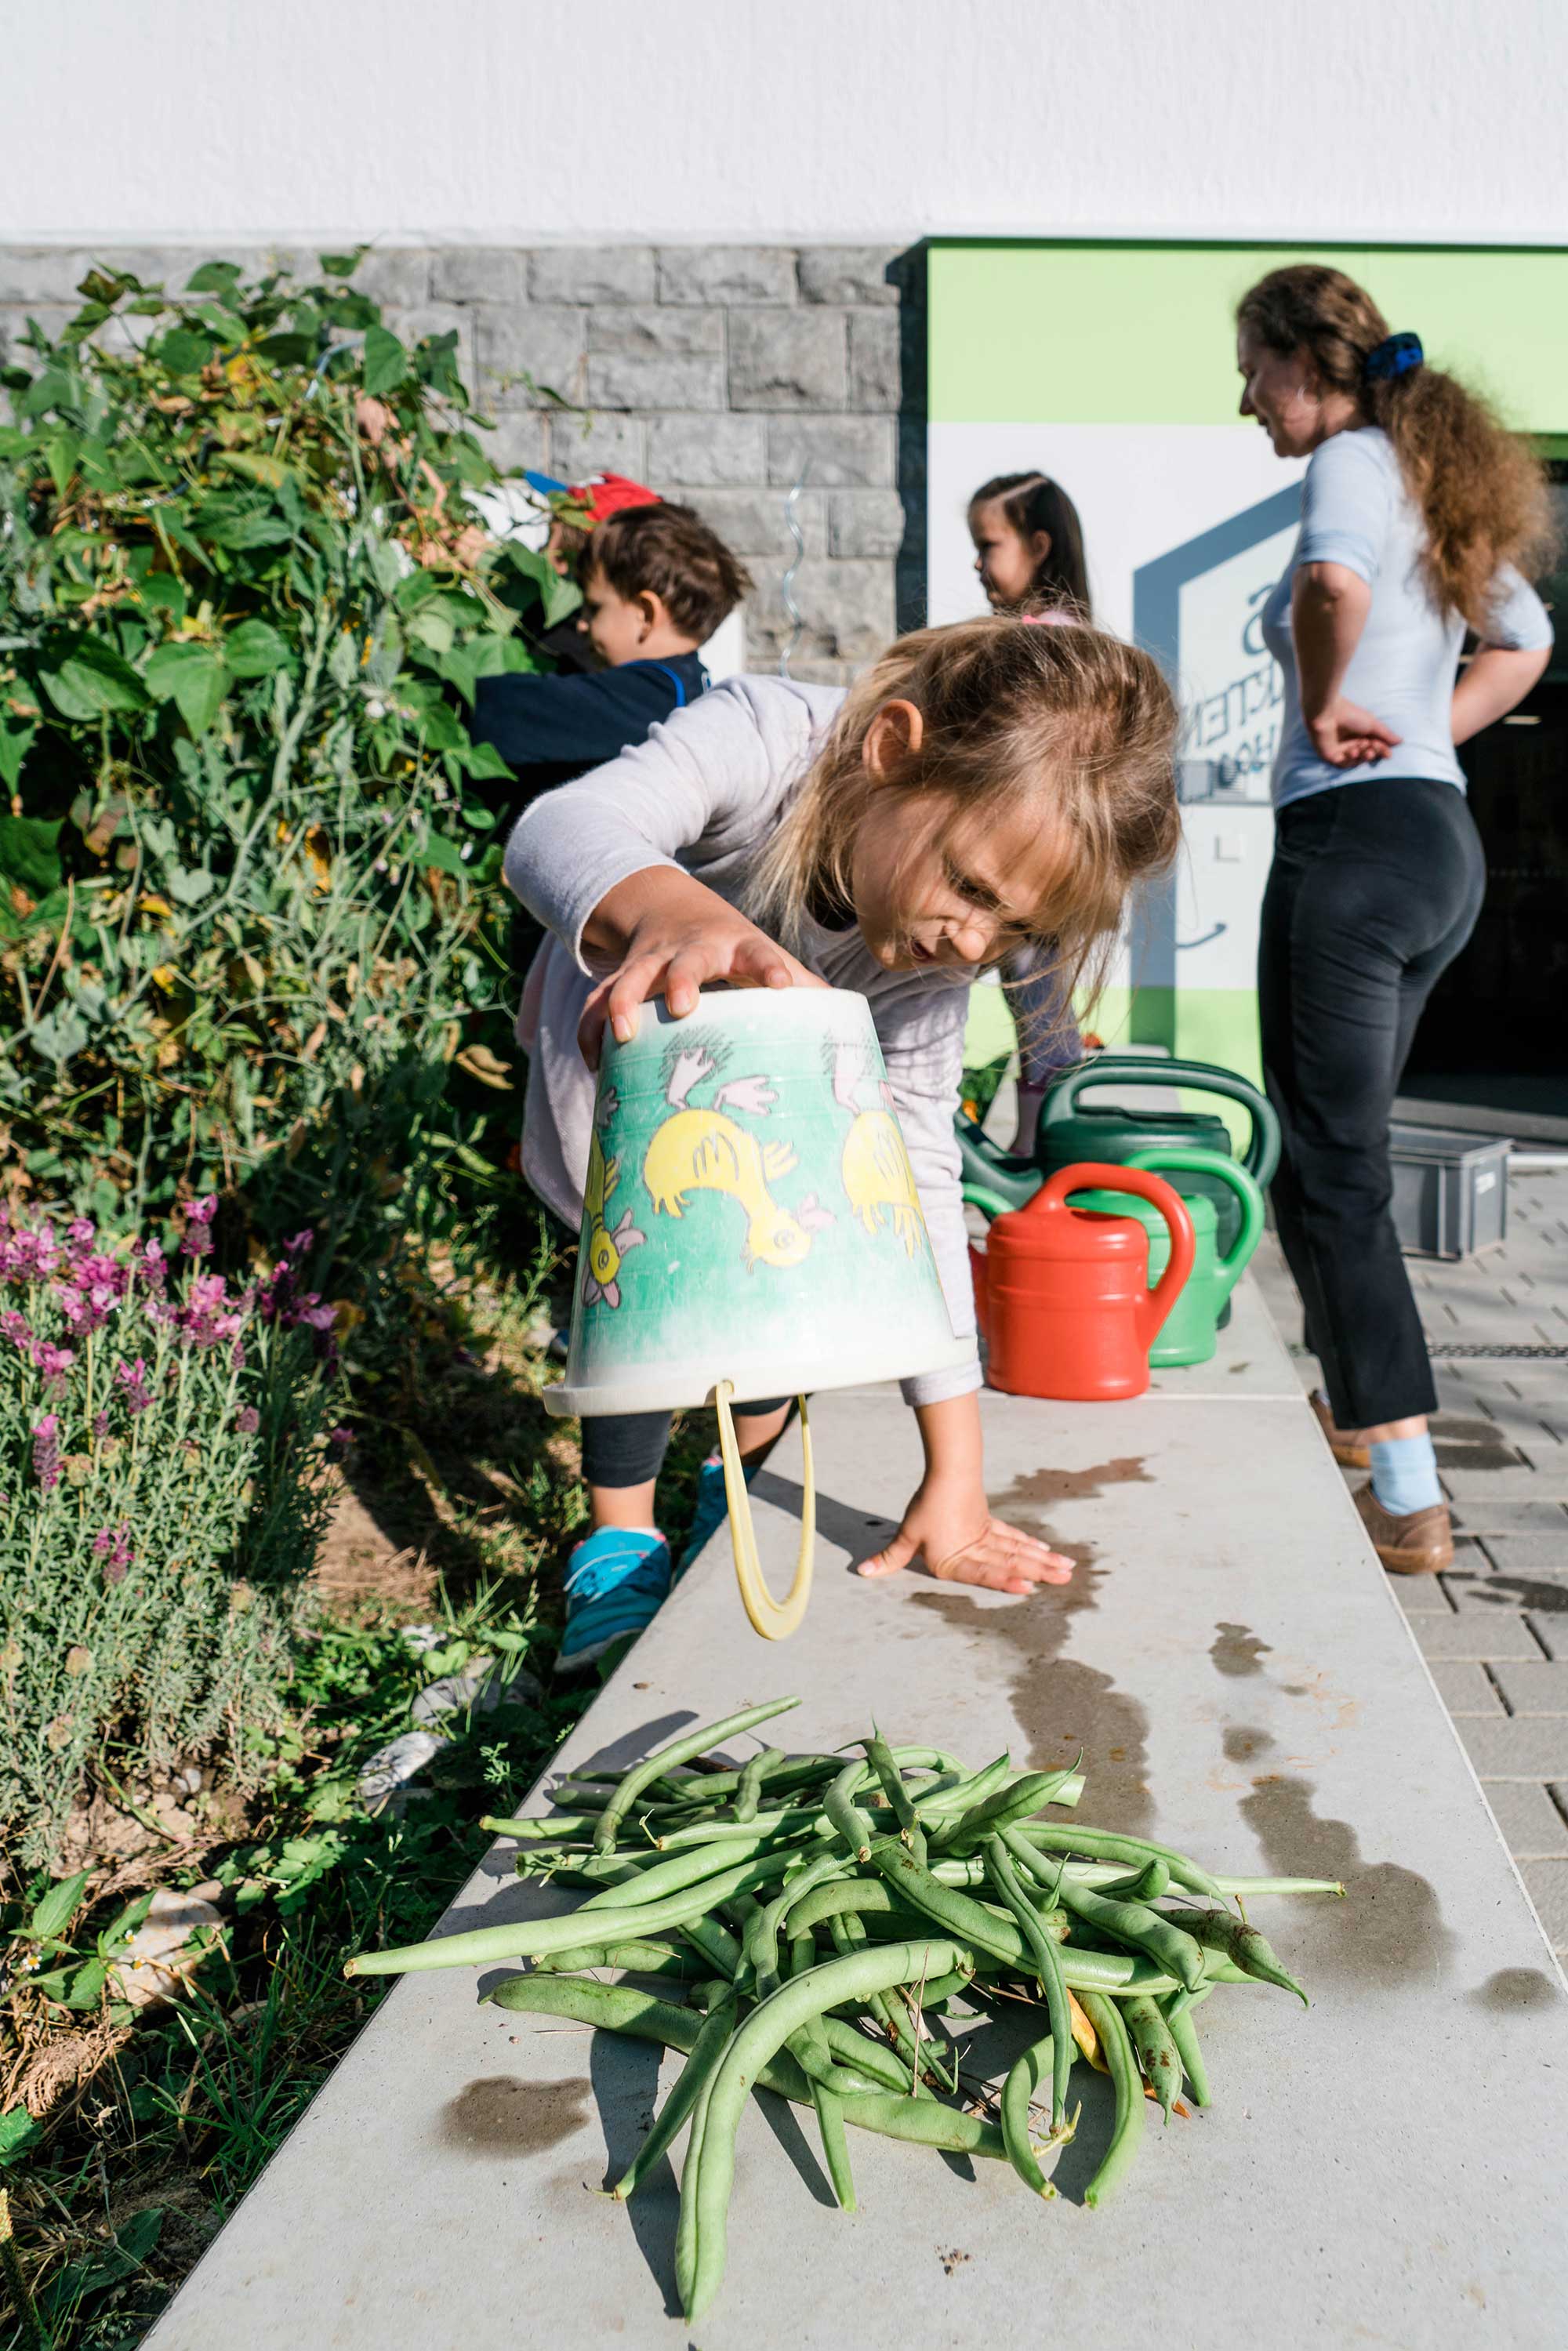 A girl empties a bucket of self-harvested beans outside and examines the beans.	